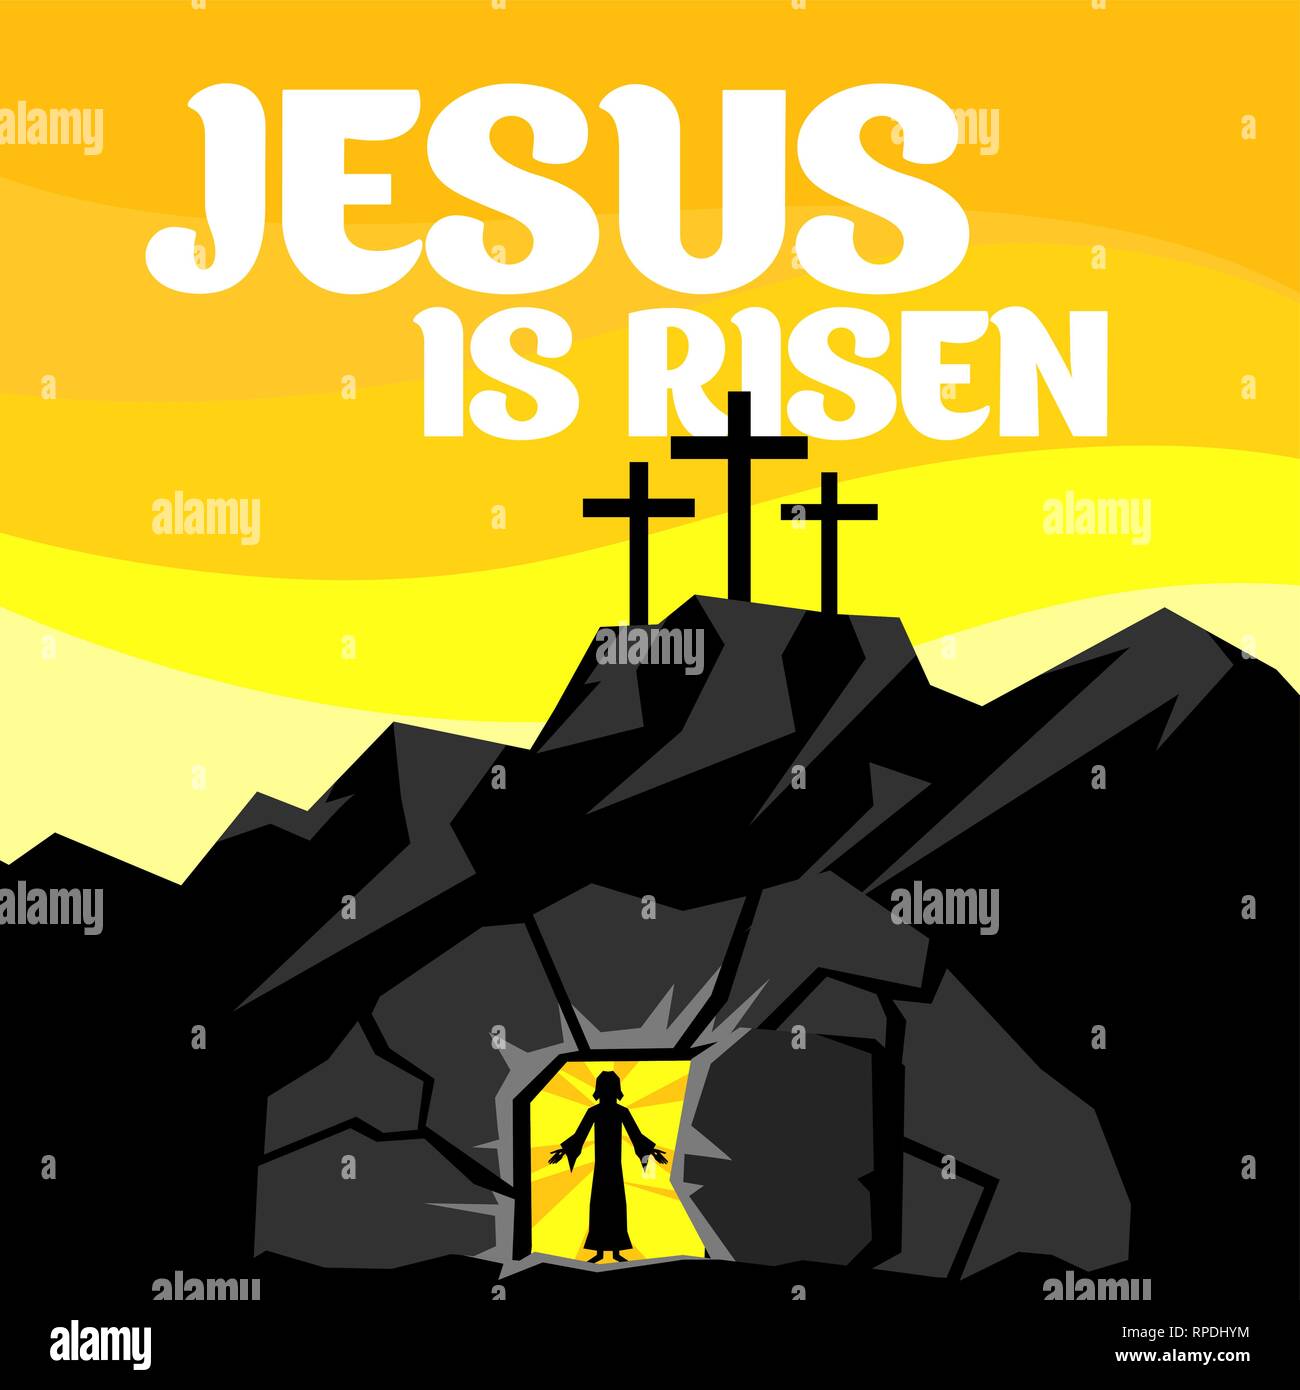 Top 999+ jesus easter images – Amazing Collection jesus easter images ...